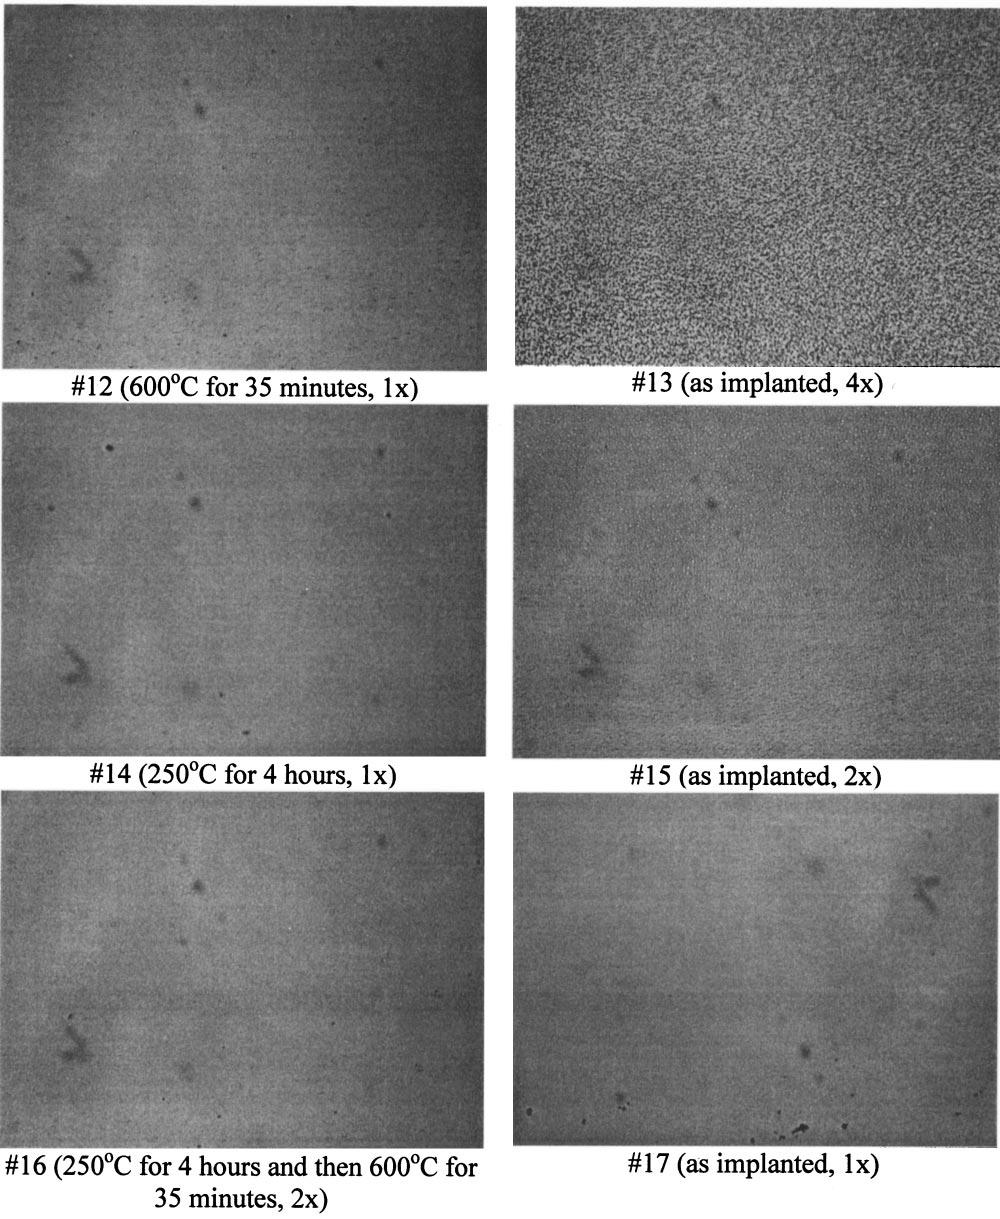 The optical micrographs of polysilicon samples deposited at 600 C and then undergoing a 900 C predep process are displayed in Fig. 5.